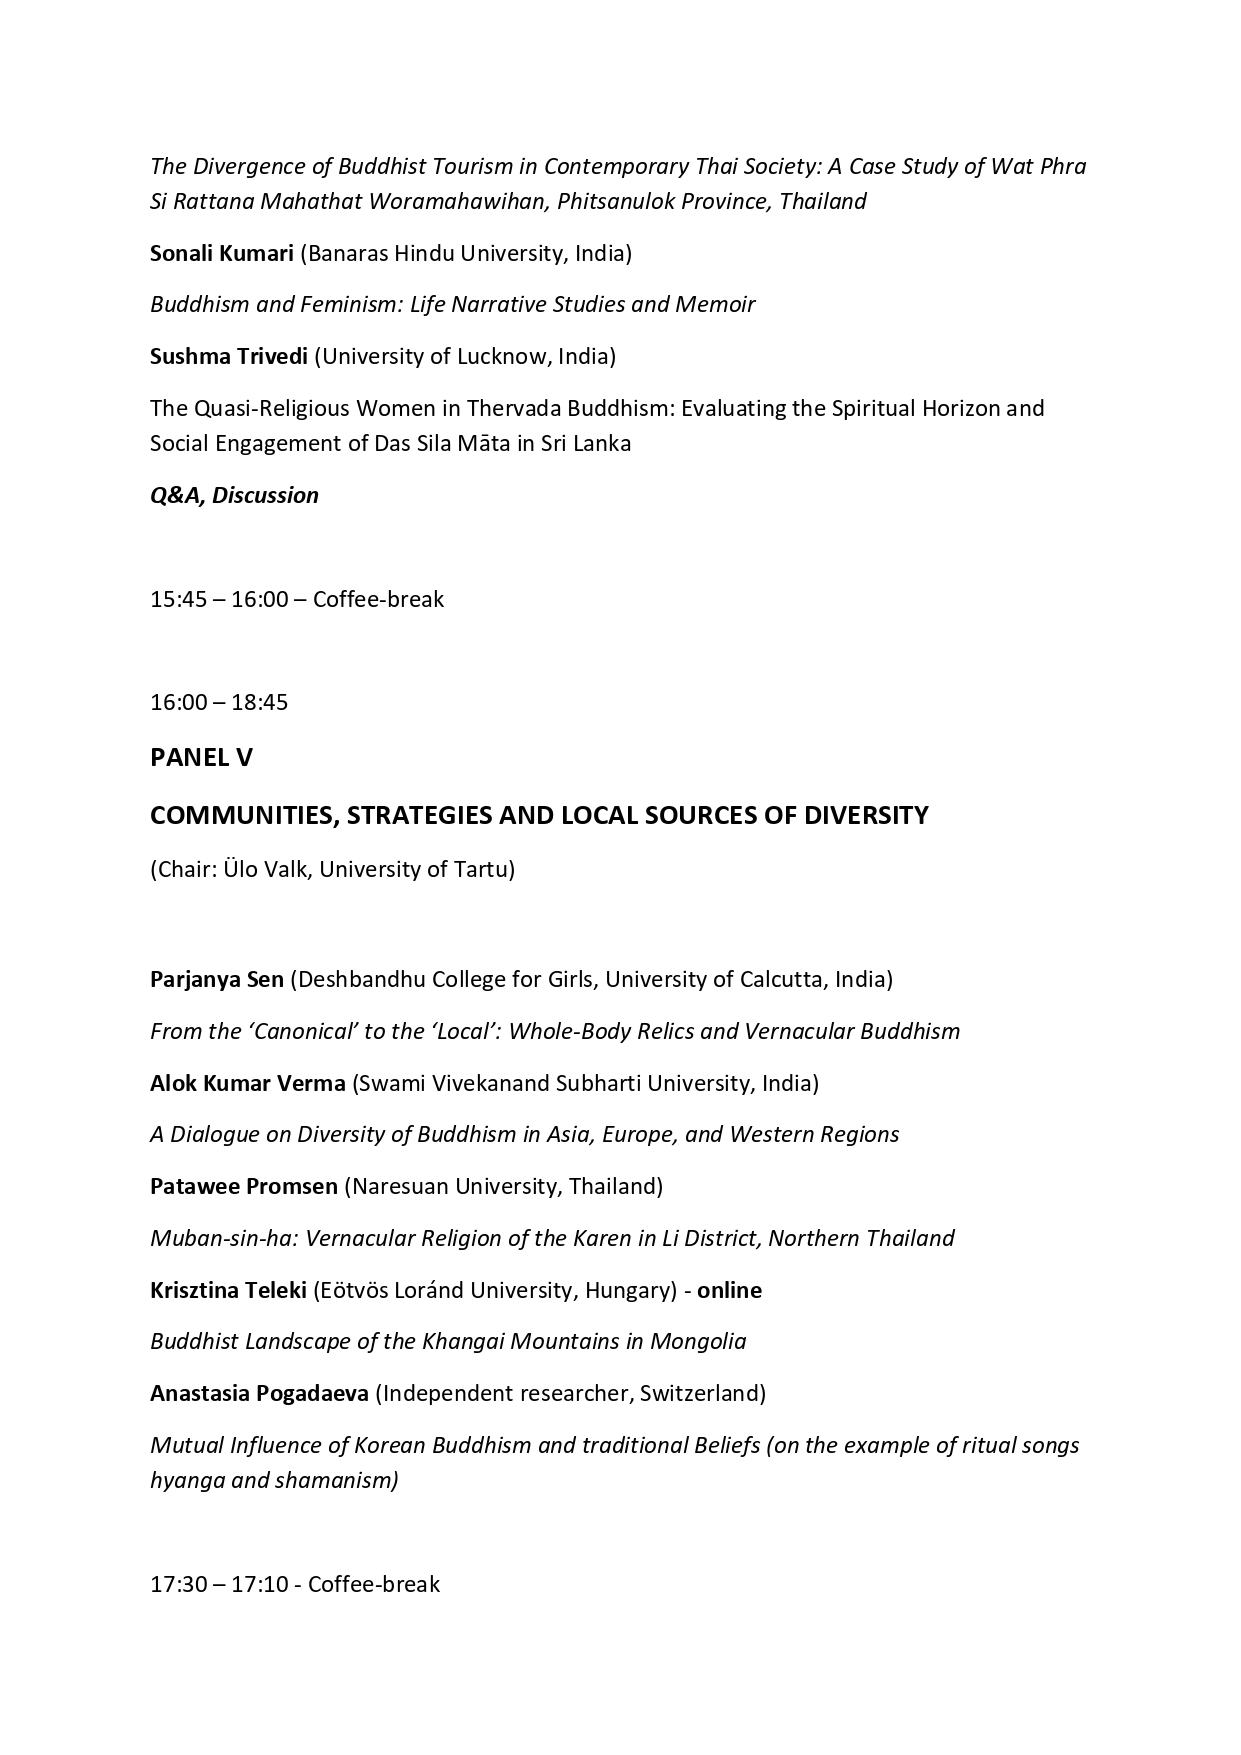 Conference program (2) (1)_page-0008